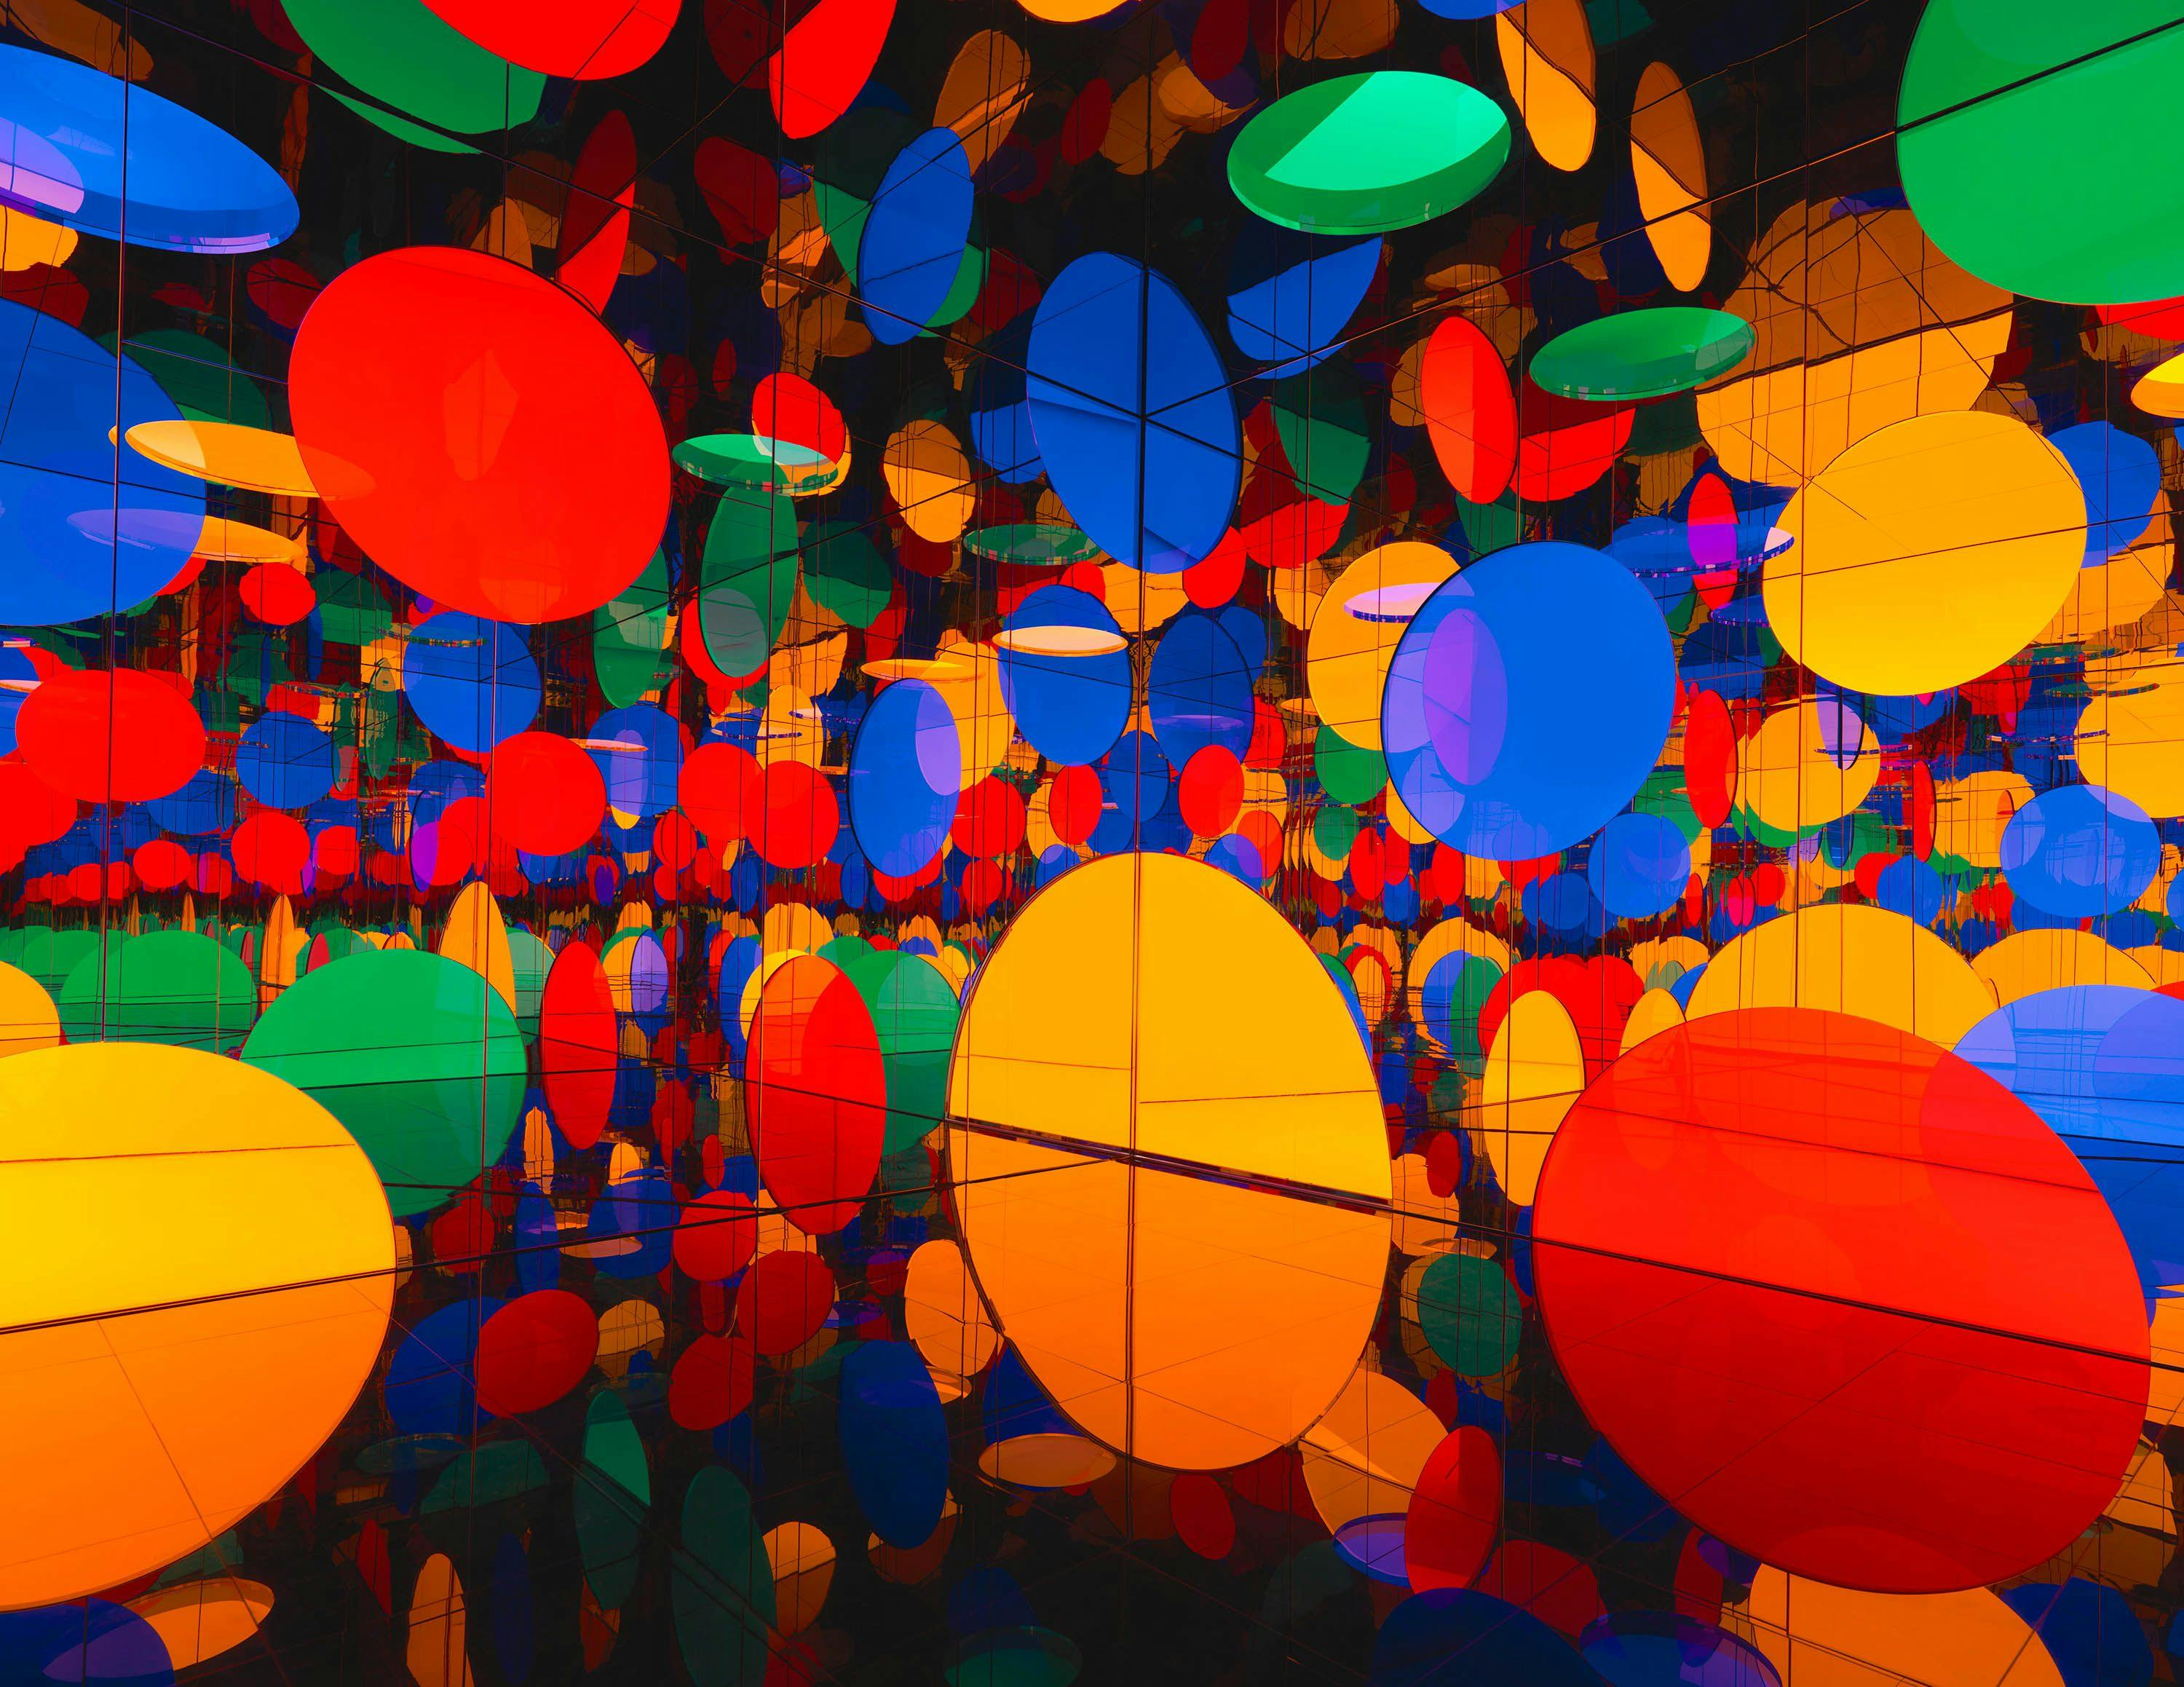 An installation by Yayoi Kusama, titled Dreaming of Earth’s Sphericity, I Would Offer My Love, dated 2023.